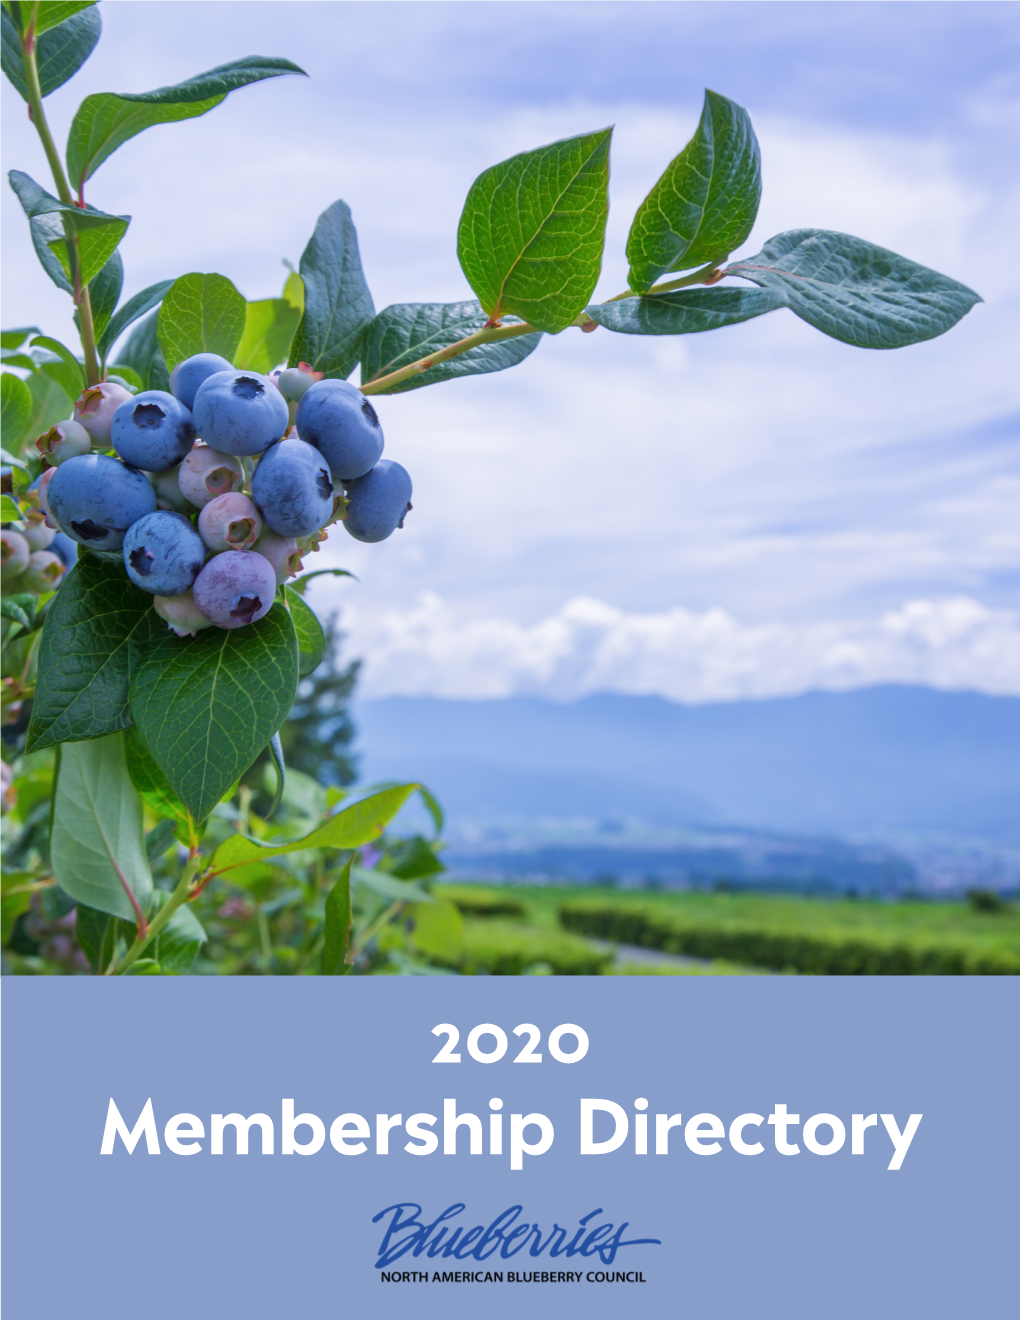 Membership Directory 2 2020 NABC MEMBERSHIP DIRECTORY Together, Growing the Blueberry Industry!